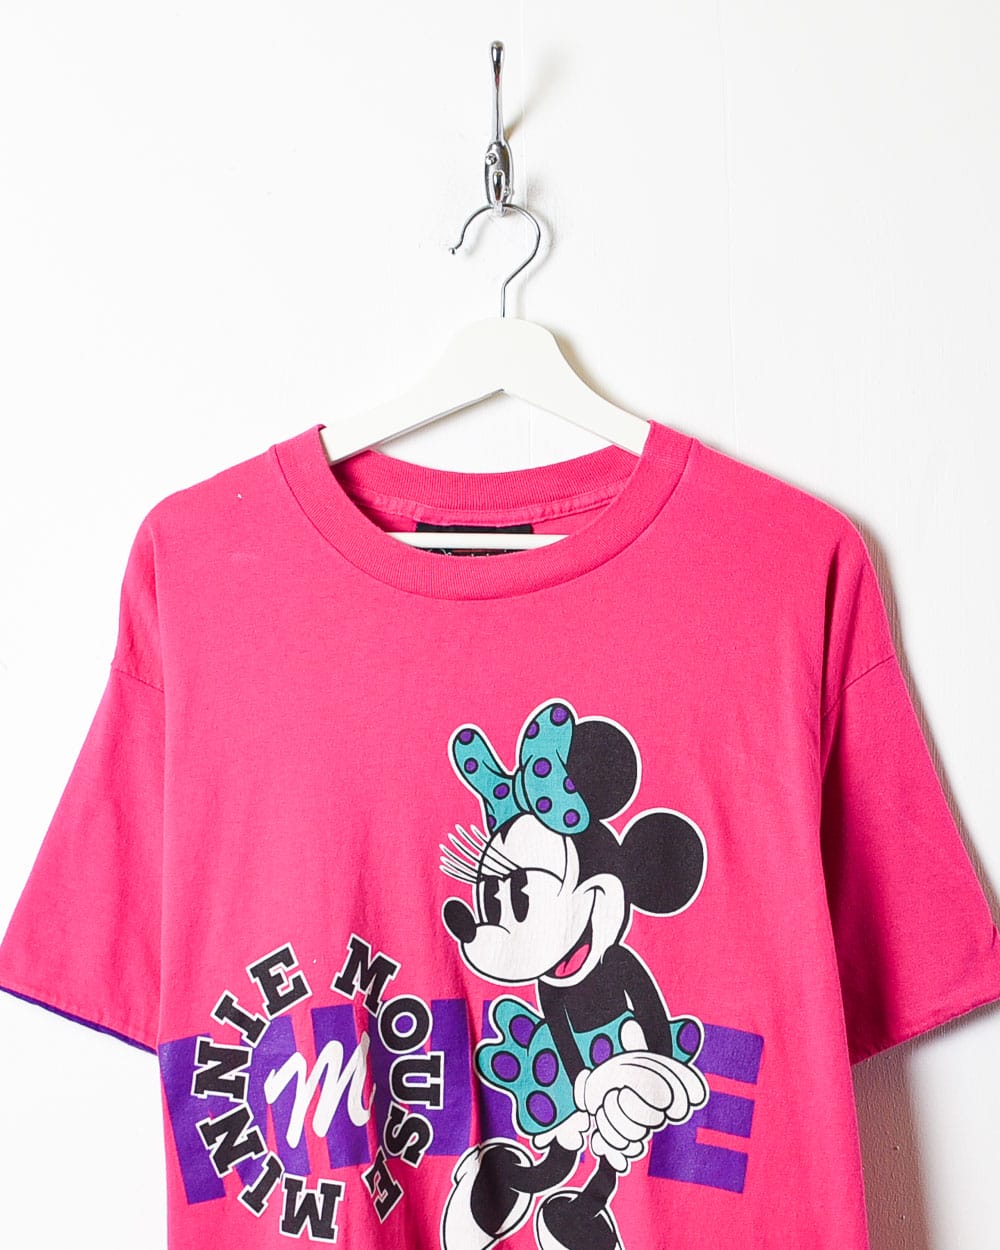 Pink Minnie Mouse T-Shirt - X-Large